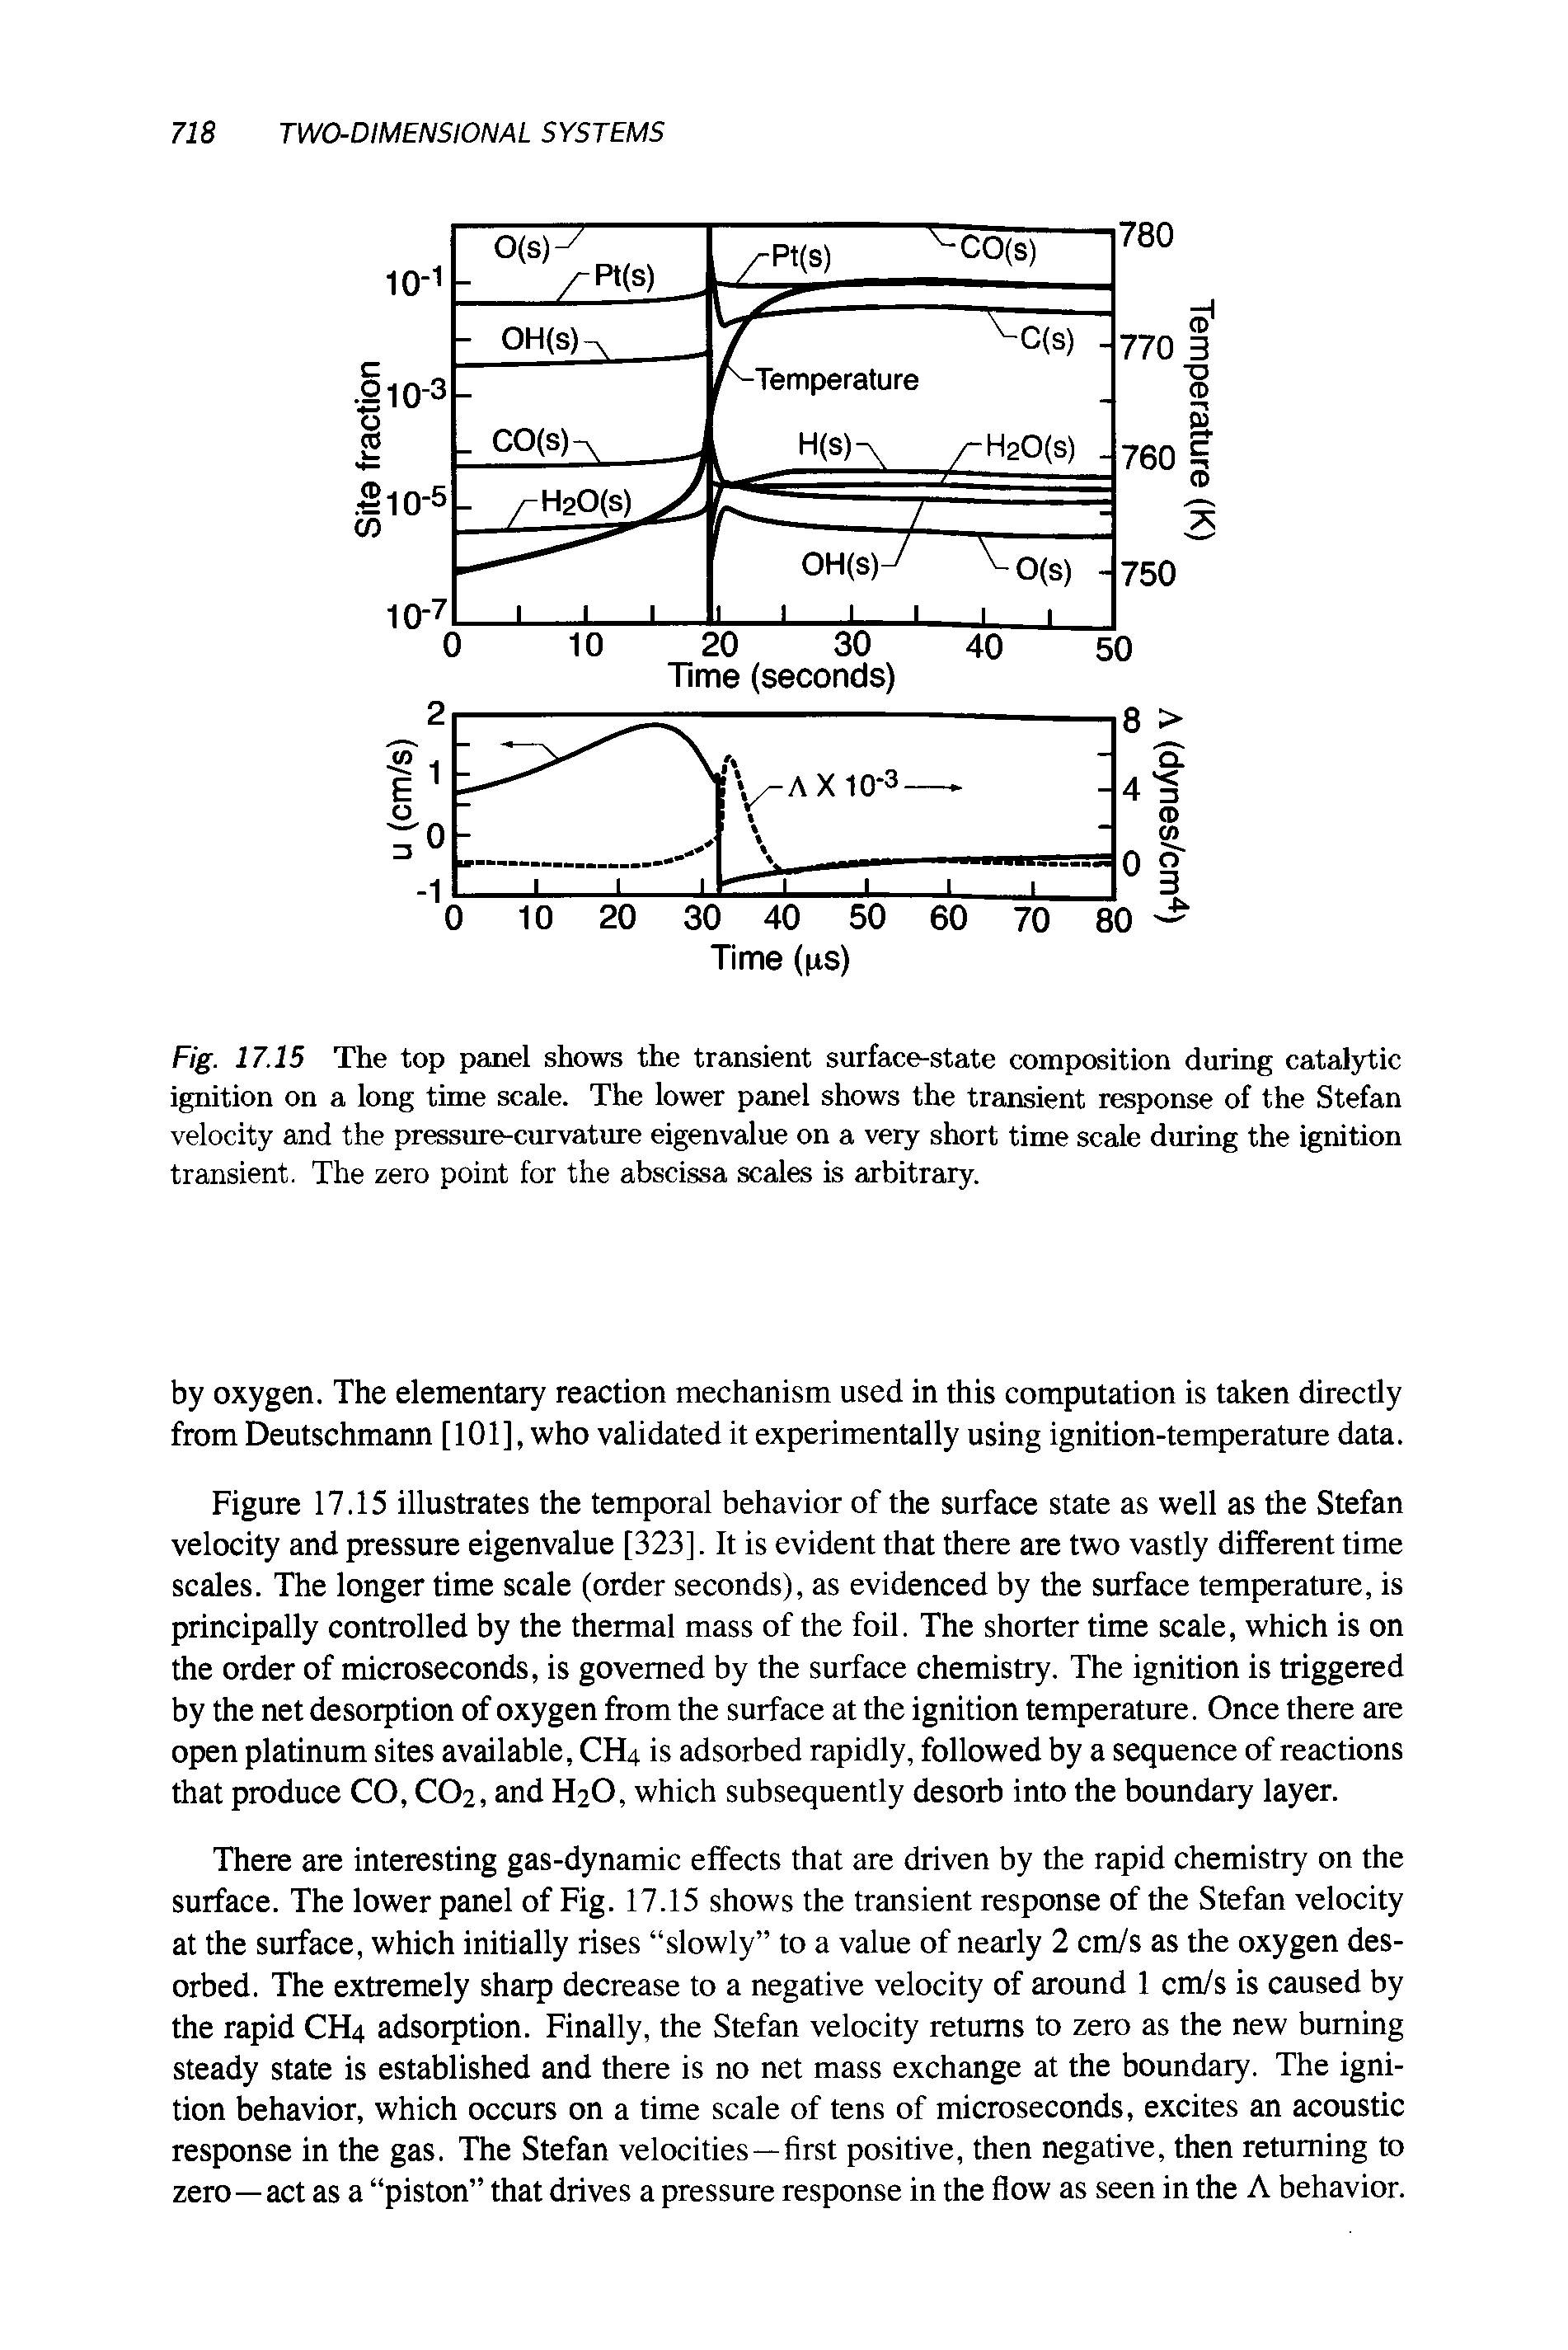 Fig. 17.15 The top panel shows the transient surface-state composition during catalytic ignition on a long time scale. The lower panel shows the transient response of the Stefan velocity and the pressure-curvature eigenvalue on a very short time scale during the ignition transient. The zero point for the abscissa scales is arbitrary.